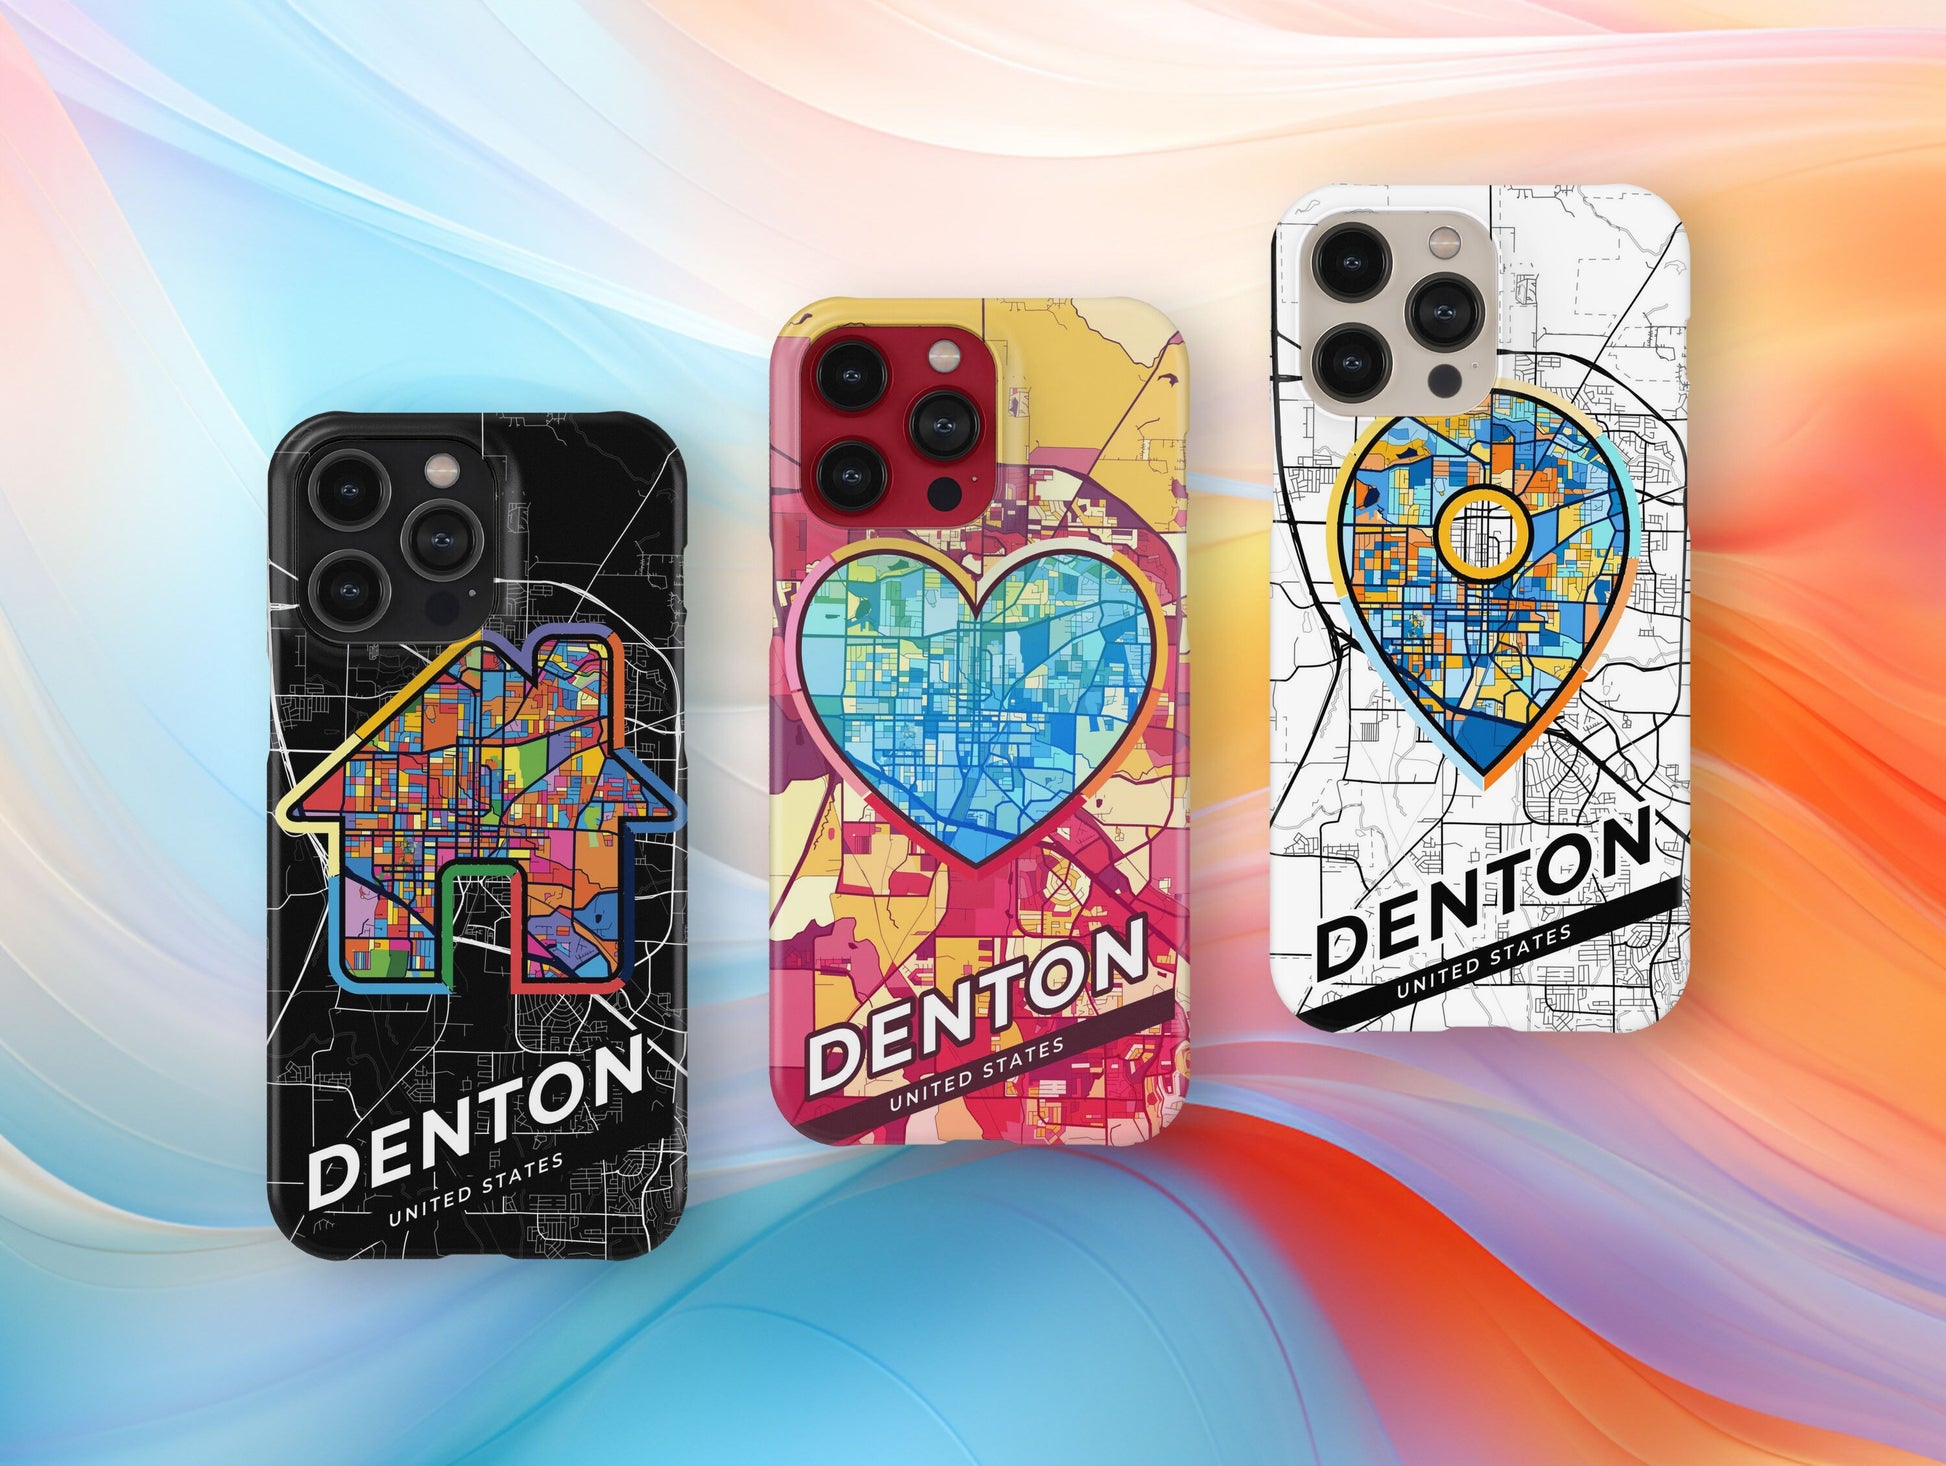 Denton Texas slim phone case with colorful icon. Birthday, wedding or housewarming gift. Couple match cases.